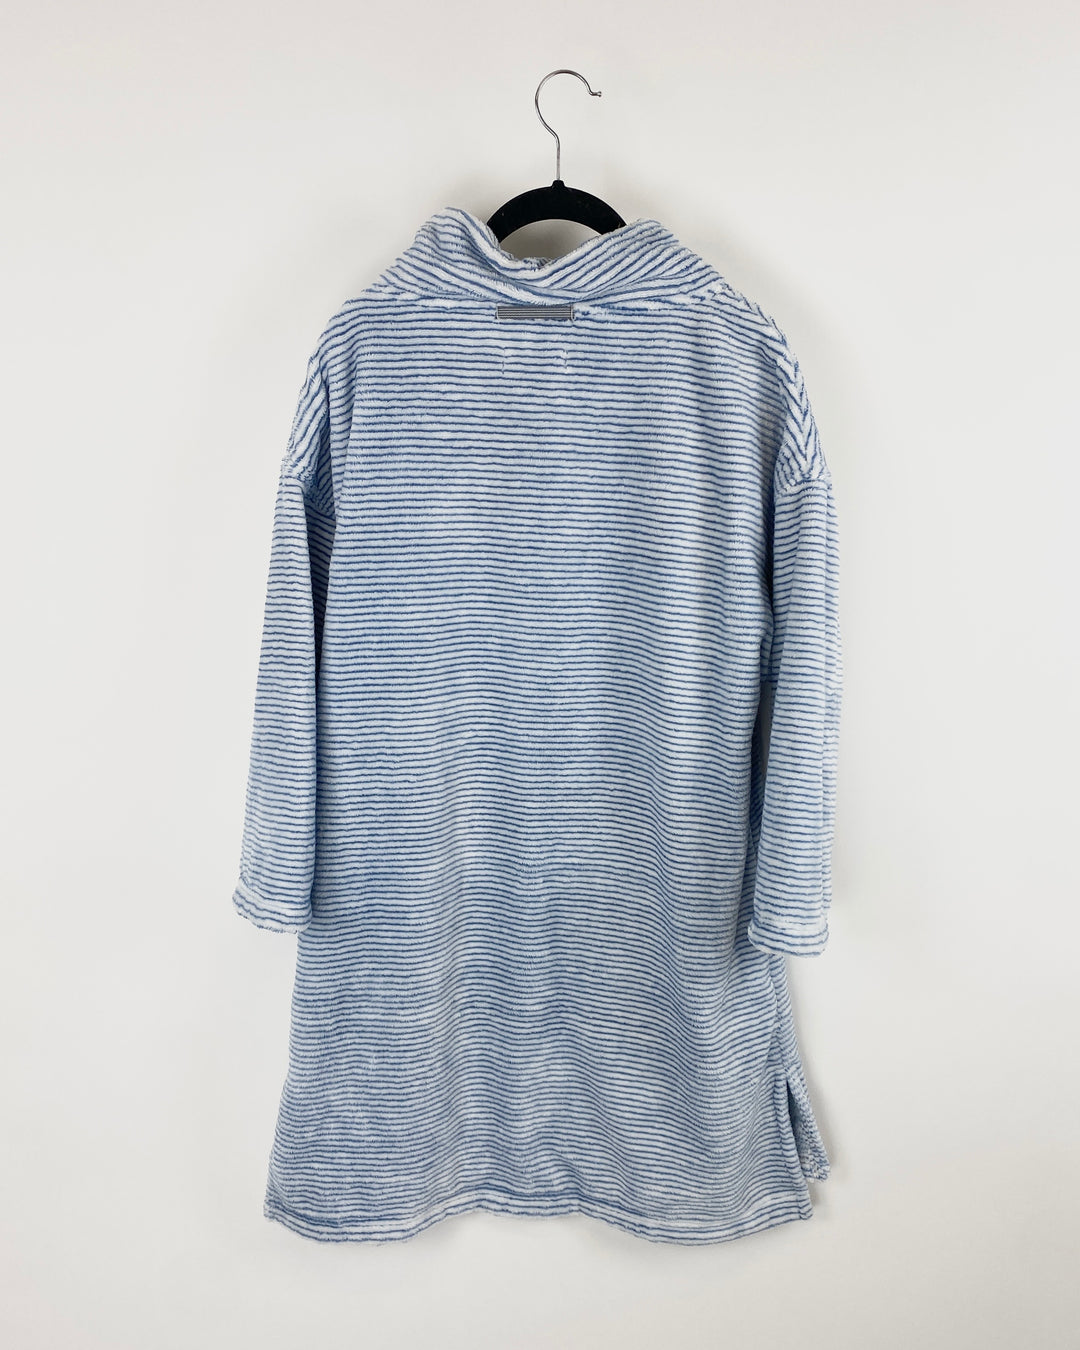 Blue and White Striped Fuzzy Long Sweatshirt - Small